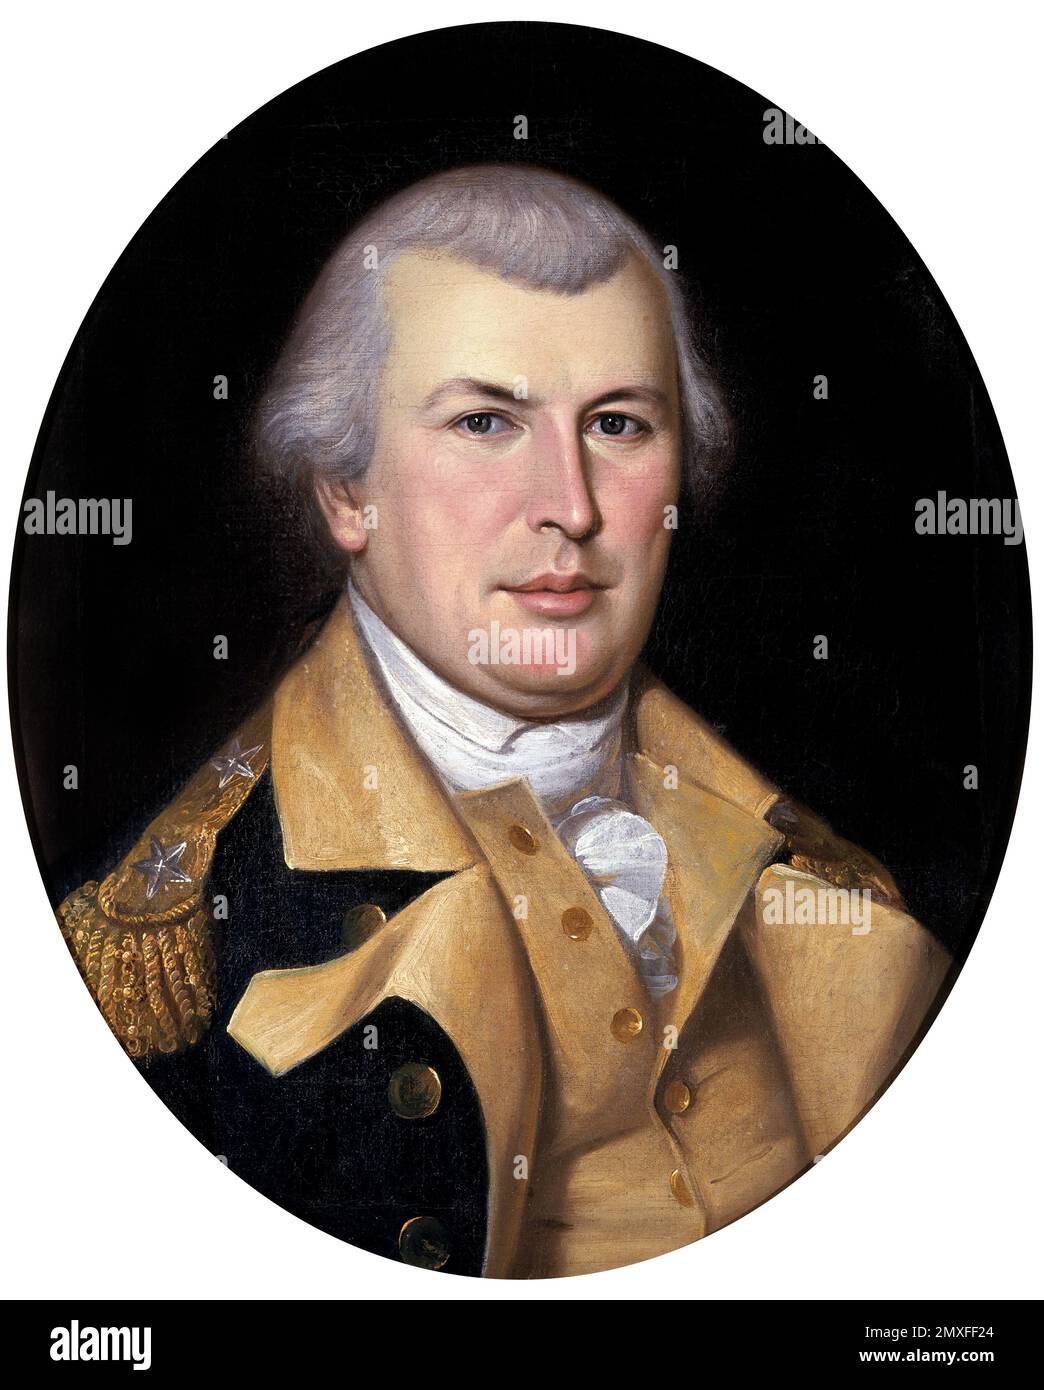 Nathanael Greene. Portrait of the Continental Army general, Nathanael Greene (1742-1786) by Charles Willson Peale, oil on canvas, 1783 Stock Photo